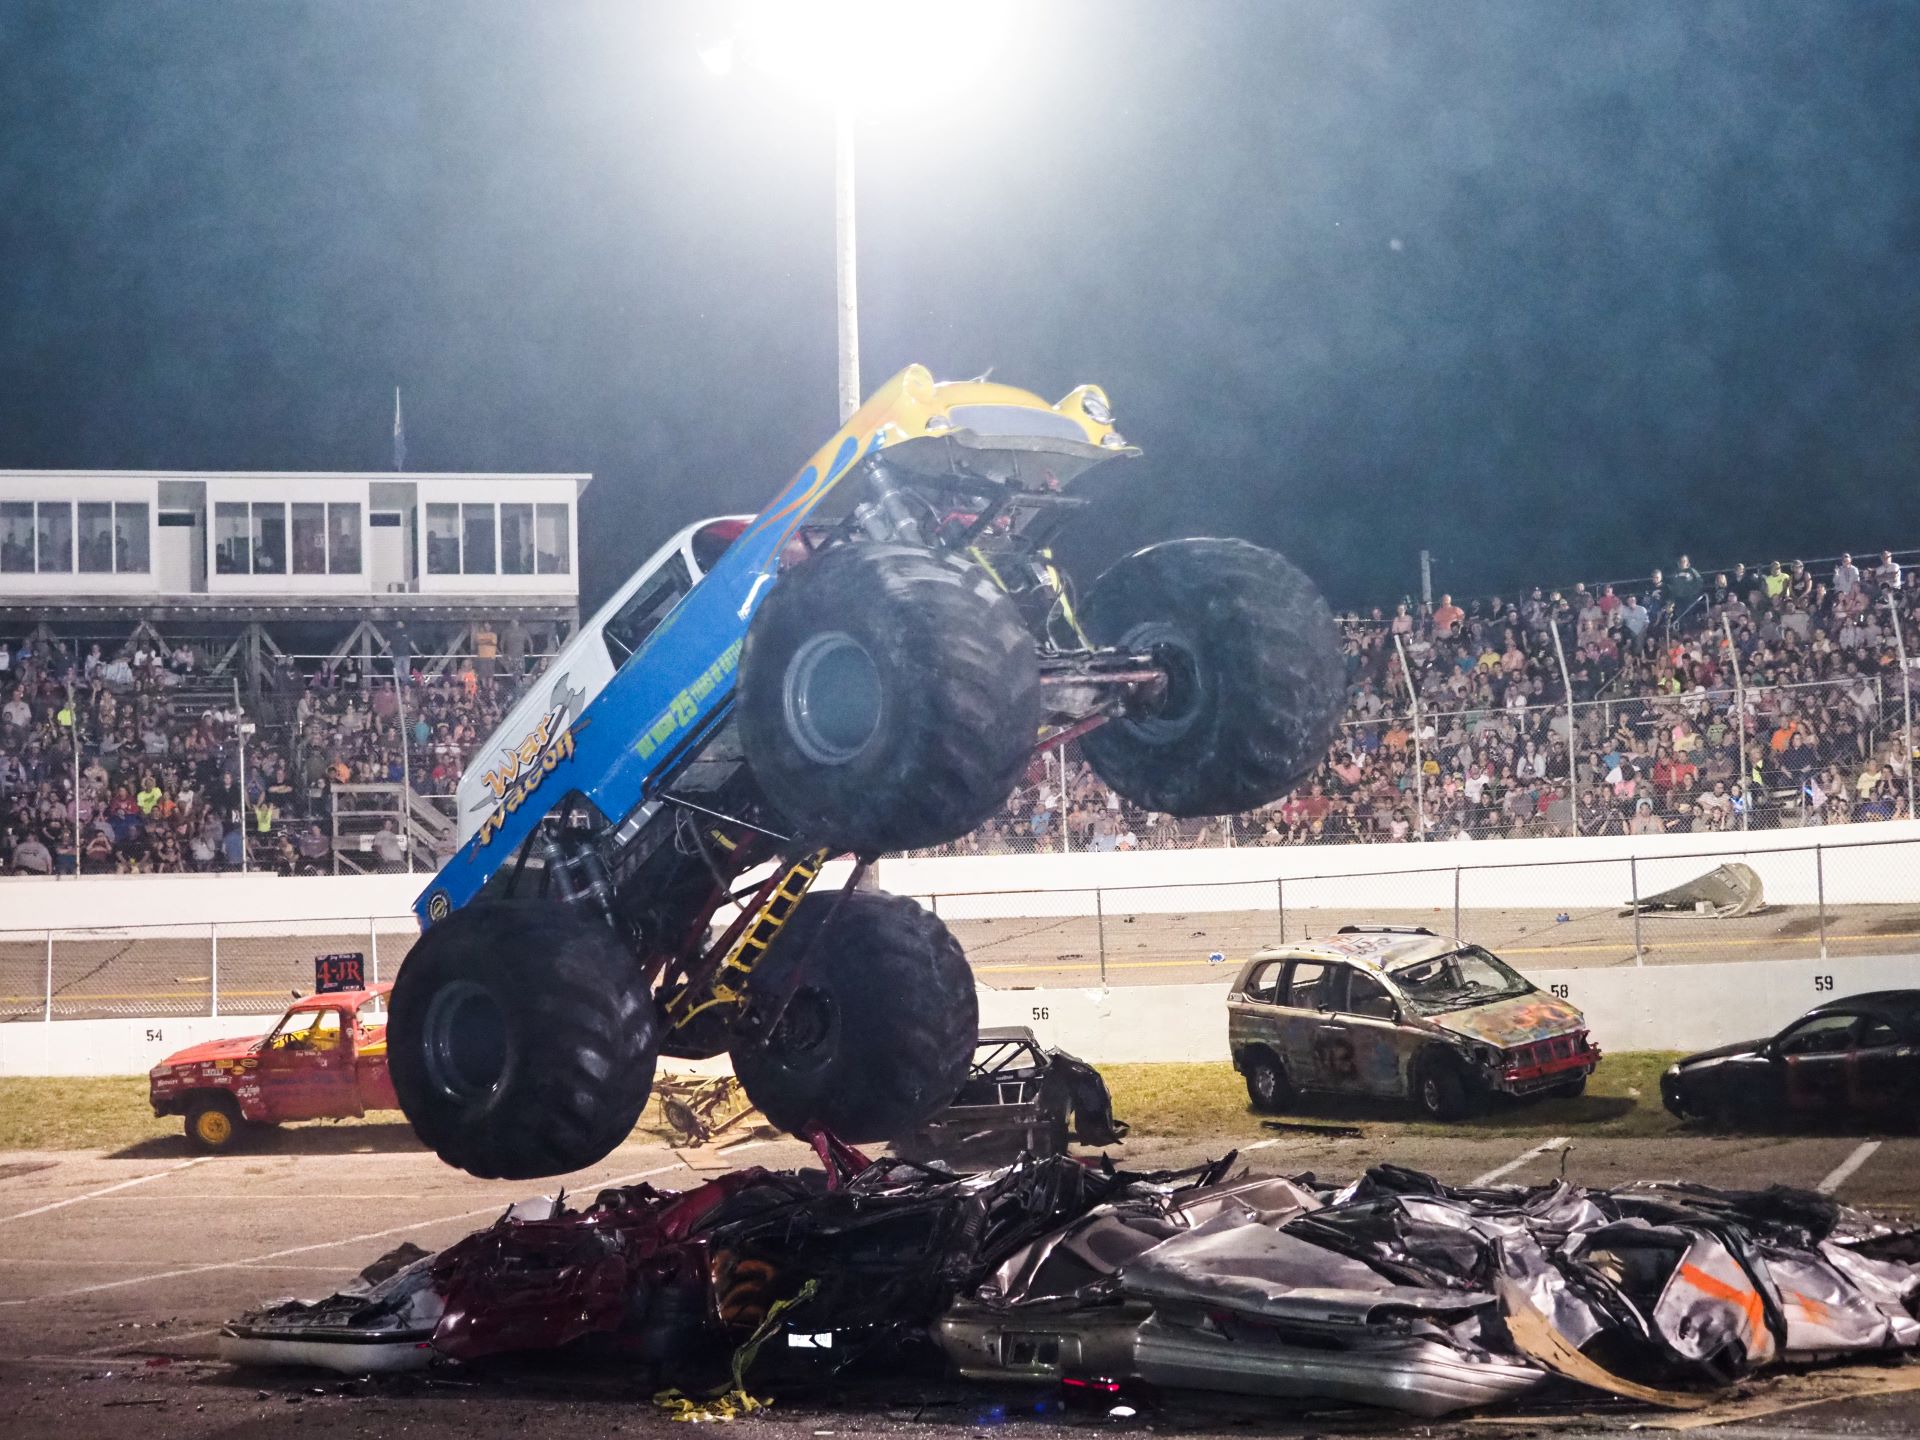 Mega Night of Destruction featuring Monster Trucks, Jet Car Melt Down, new Zoo Double Decker Cars, Bus & Trailer Races, New Stunts by Scarecrow & More PLUS Fireworks